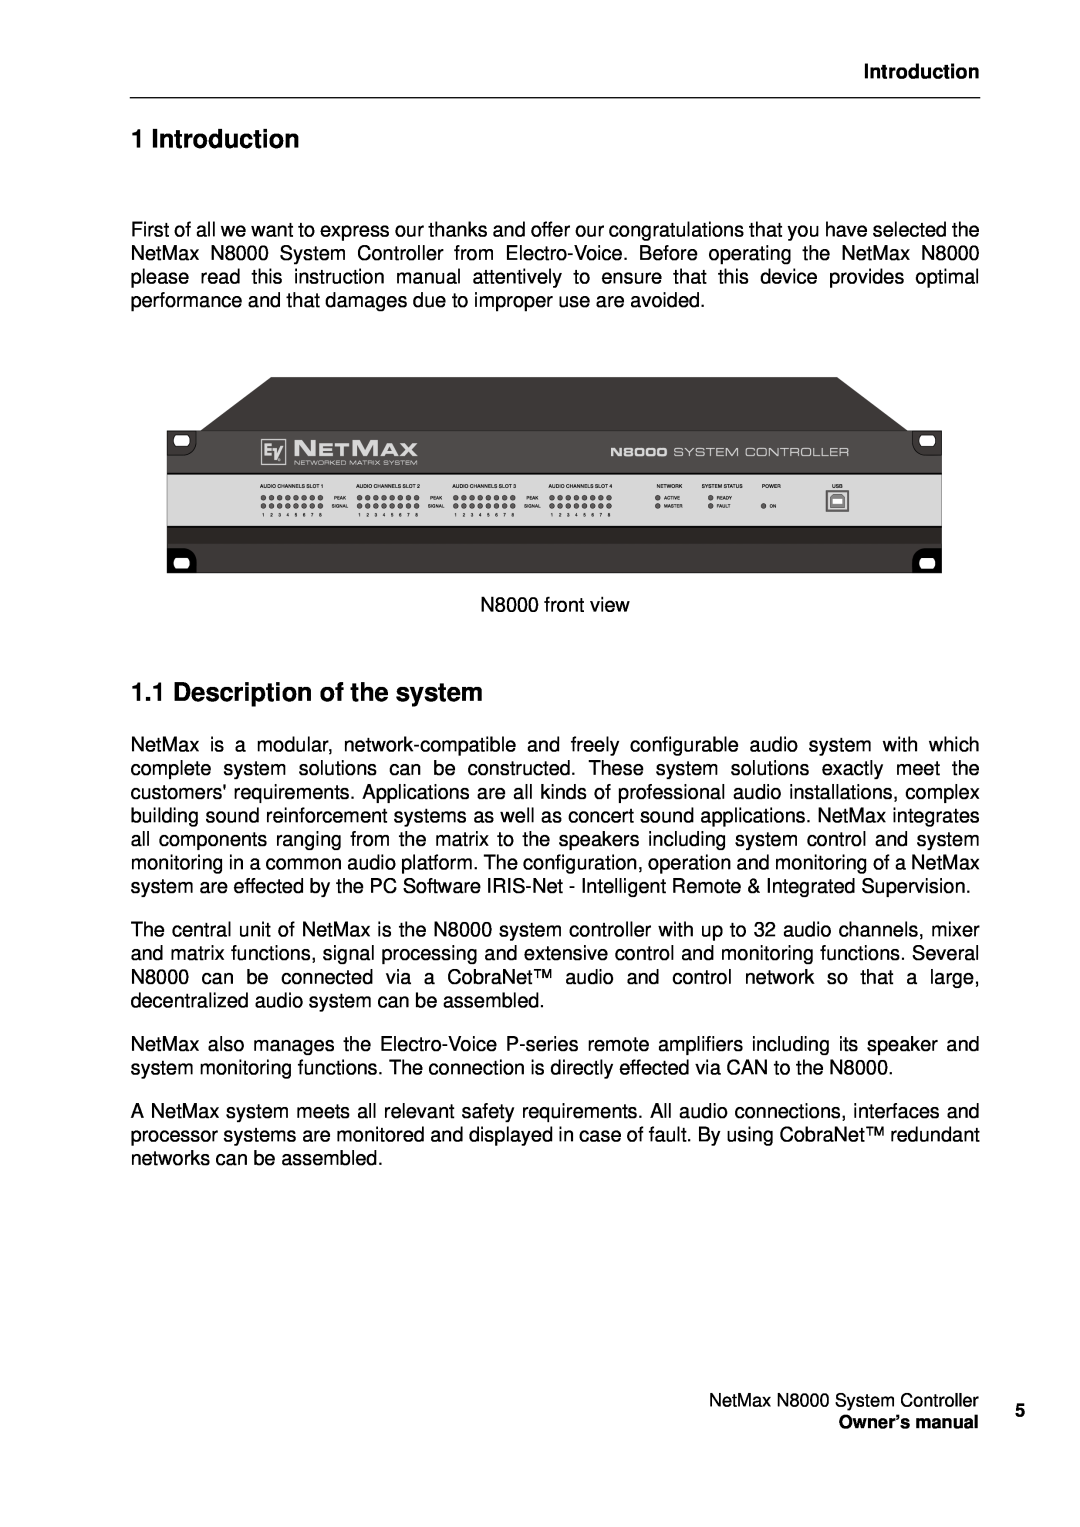 Electro-Voice NetMax N8000 owner manual Introduction, Description of the system 